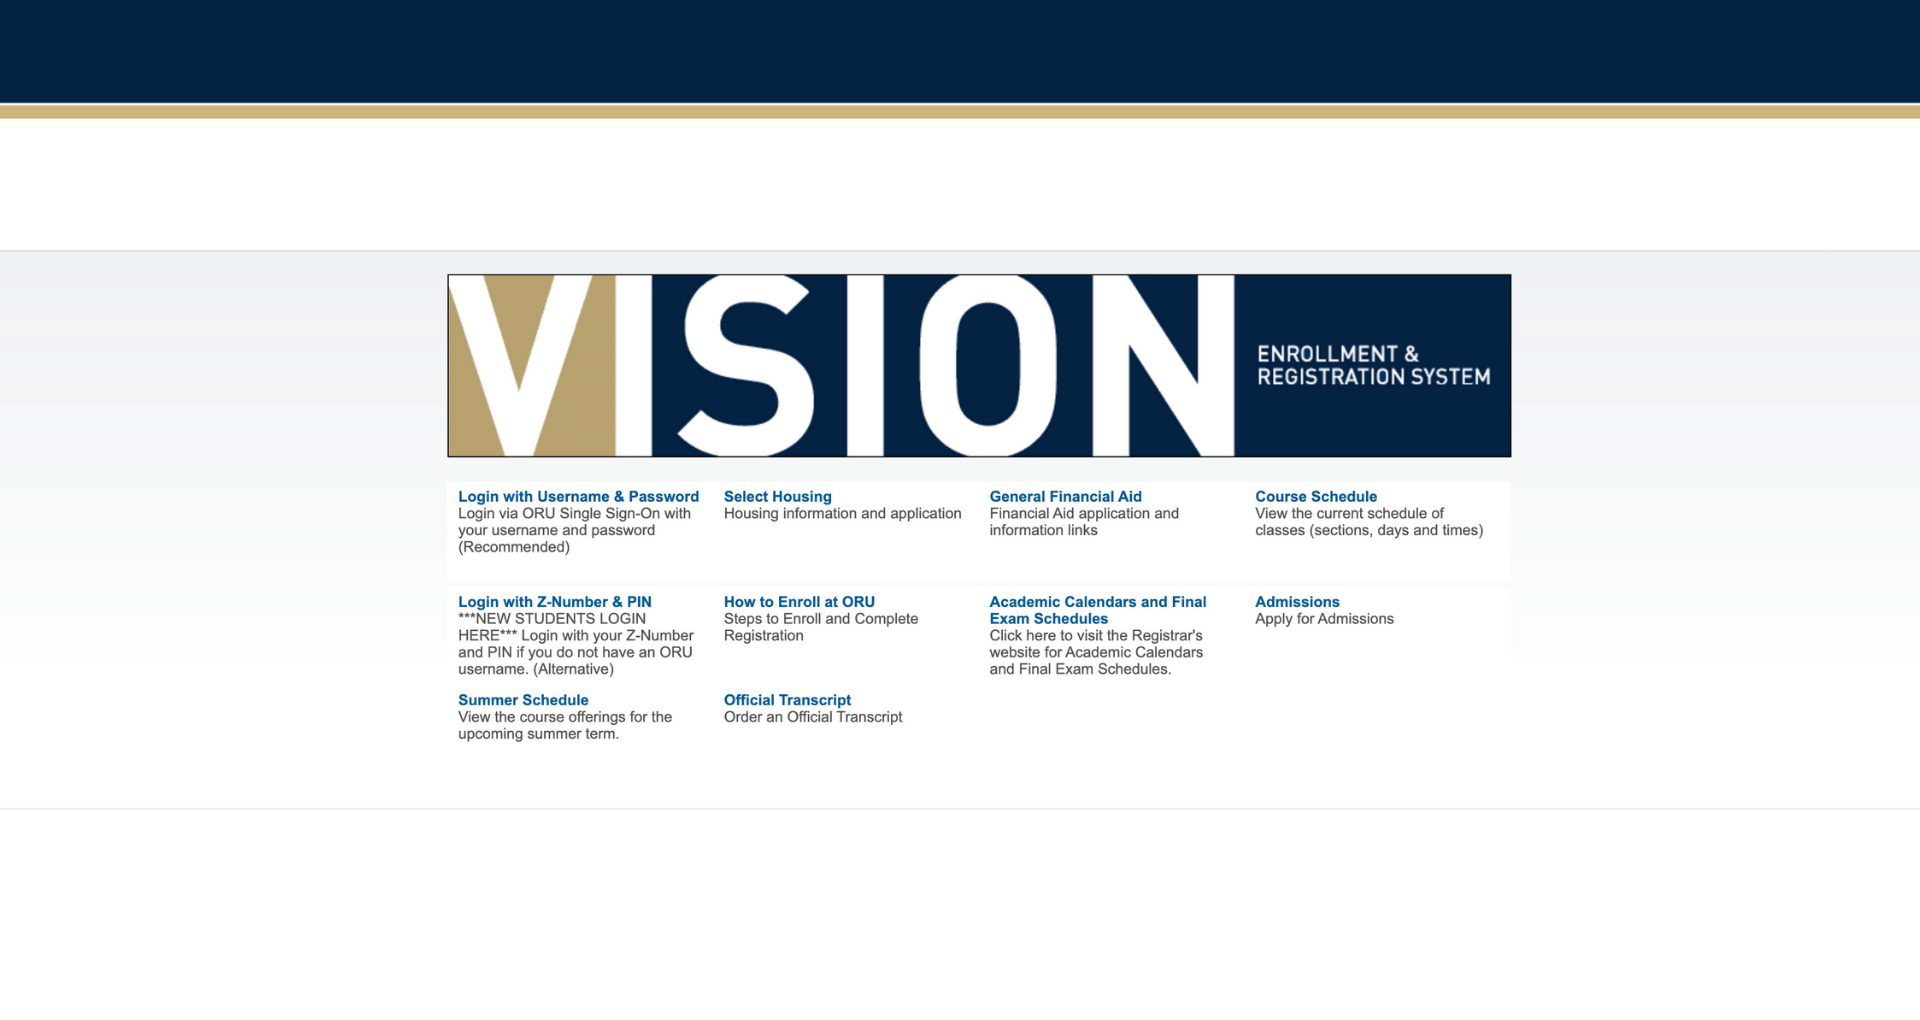 Access VISION and Complete Registration